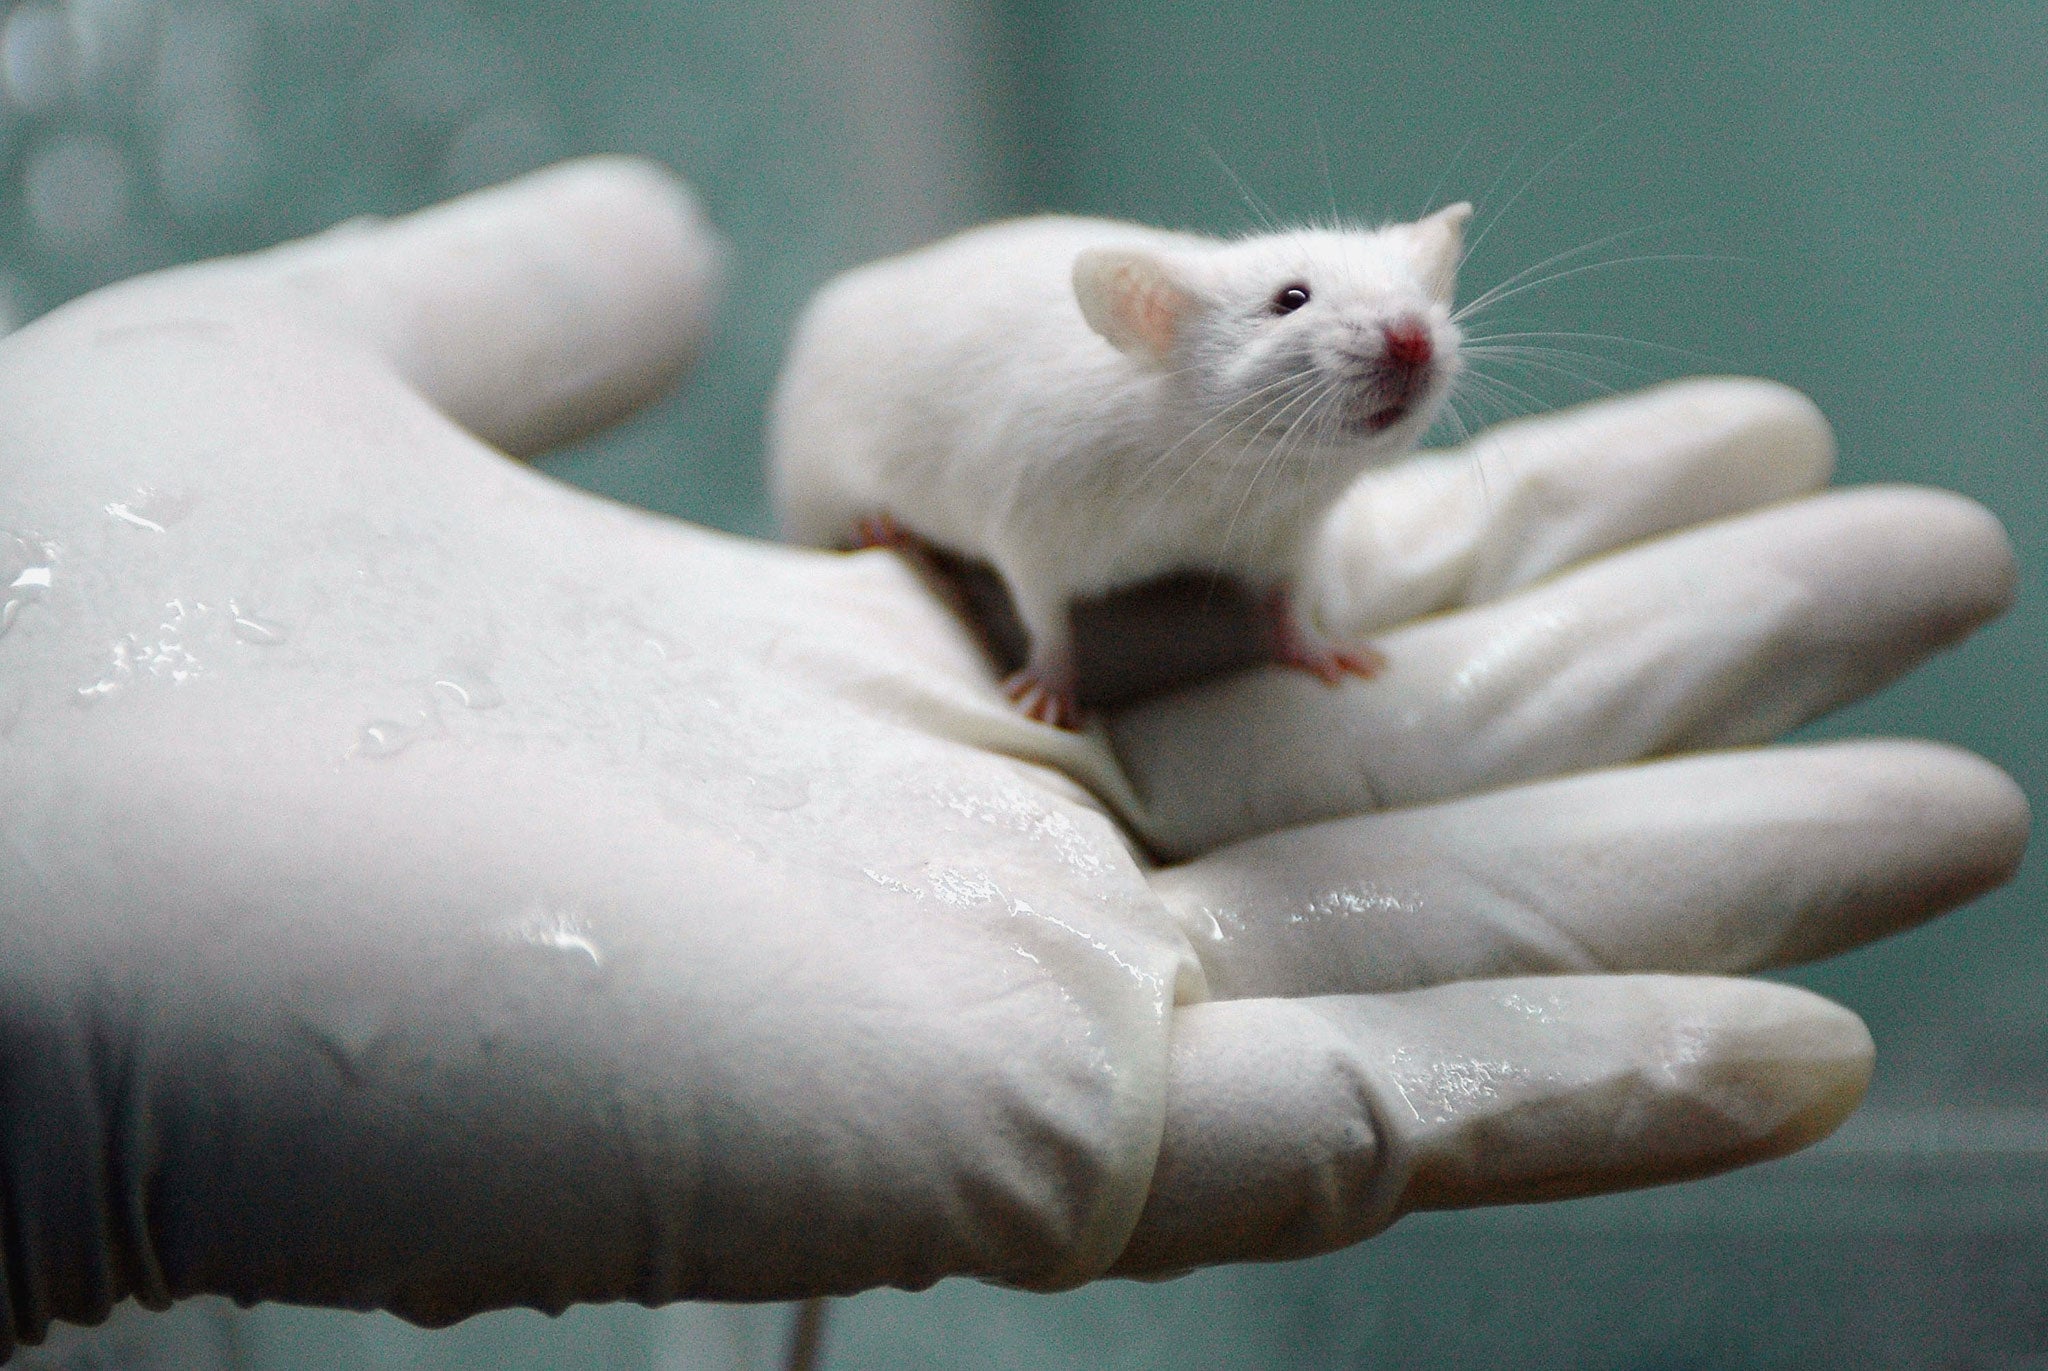 Mind-reader: Rats have been shown to communicate telepathically